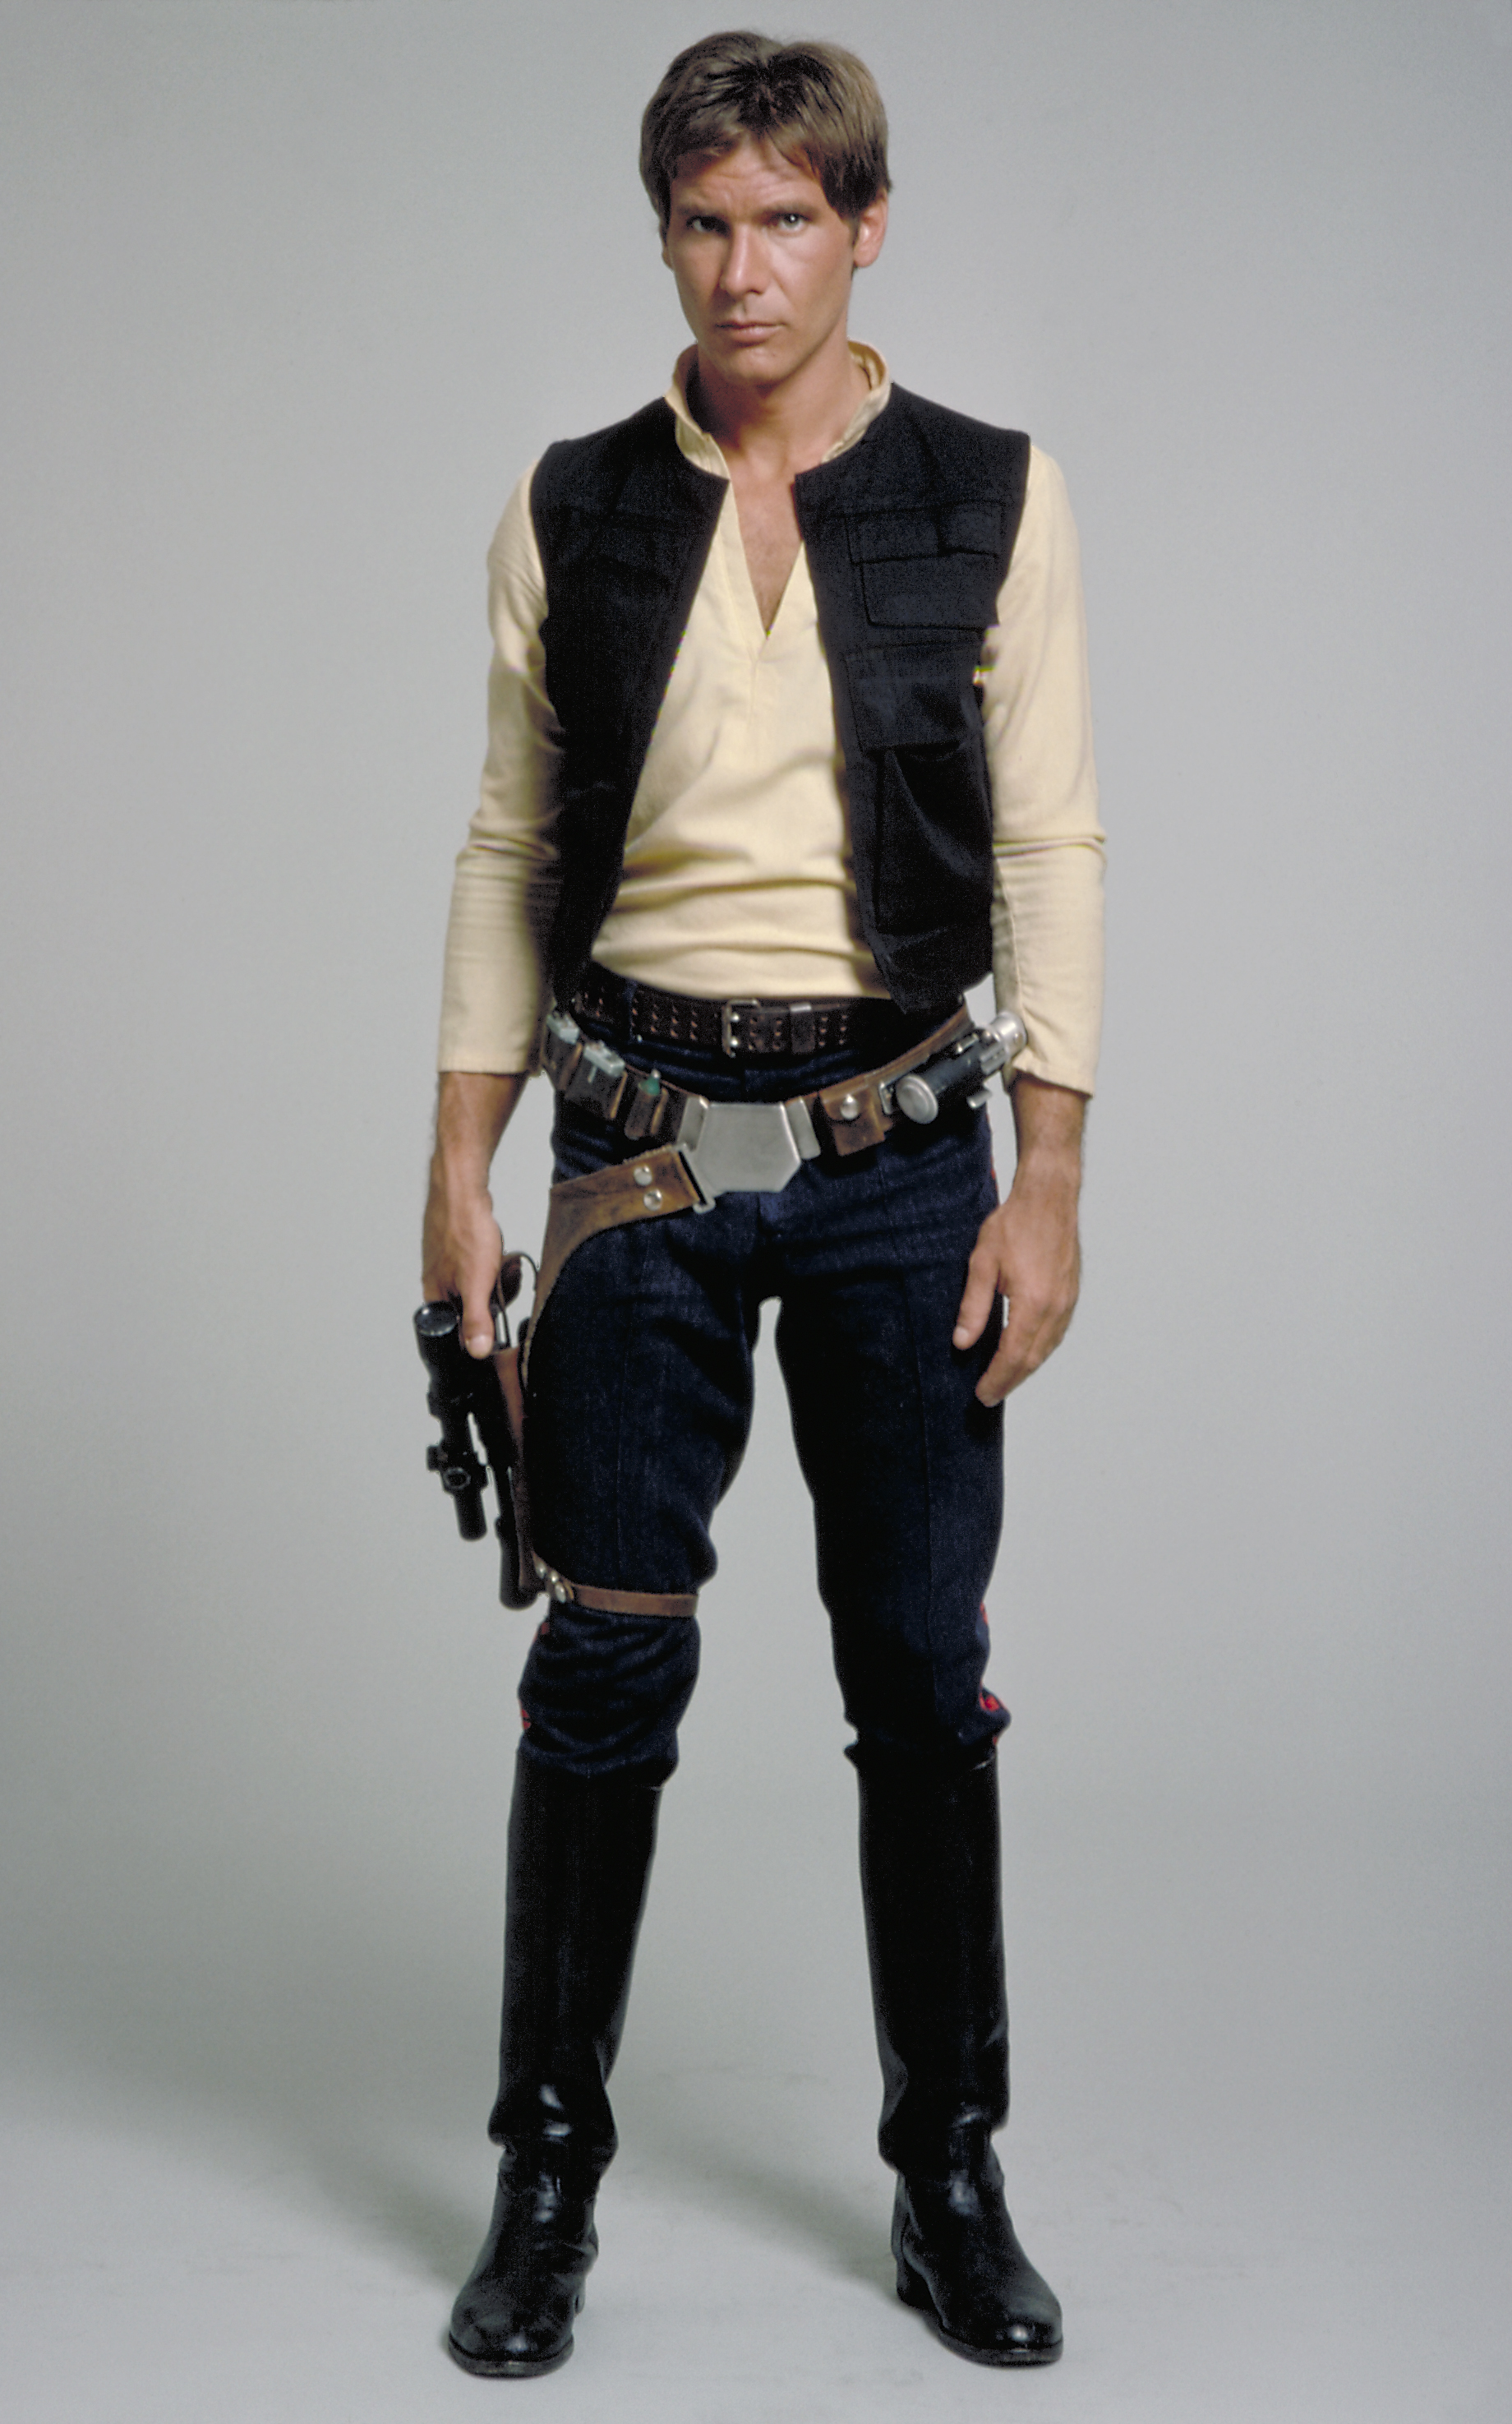 Star Wars Kids Han Solo Costume Style 1 Age 8-10 HEIGHT 4’ 8” 5' Large 